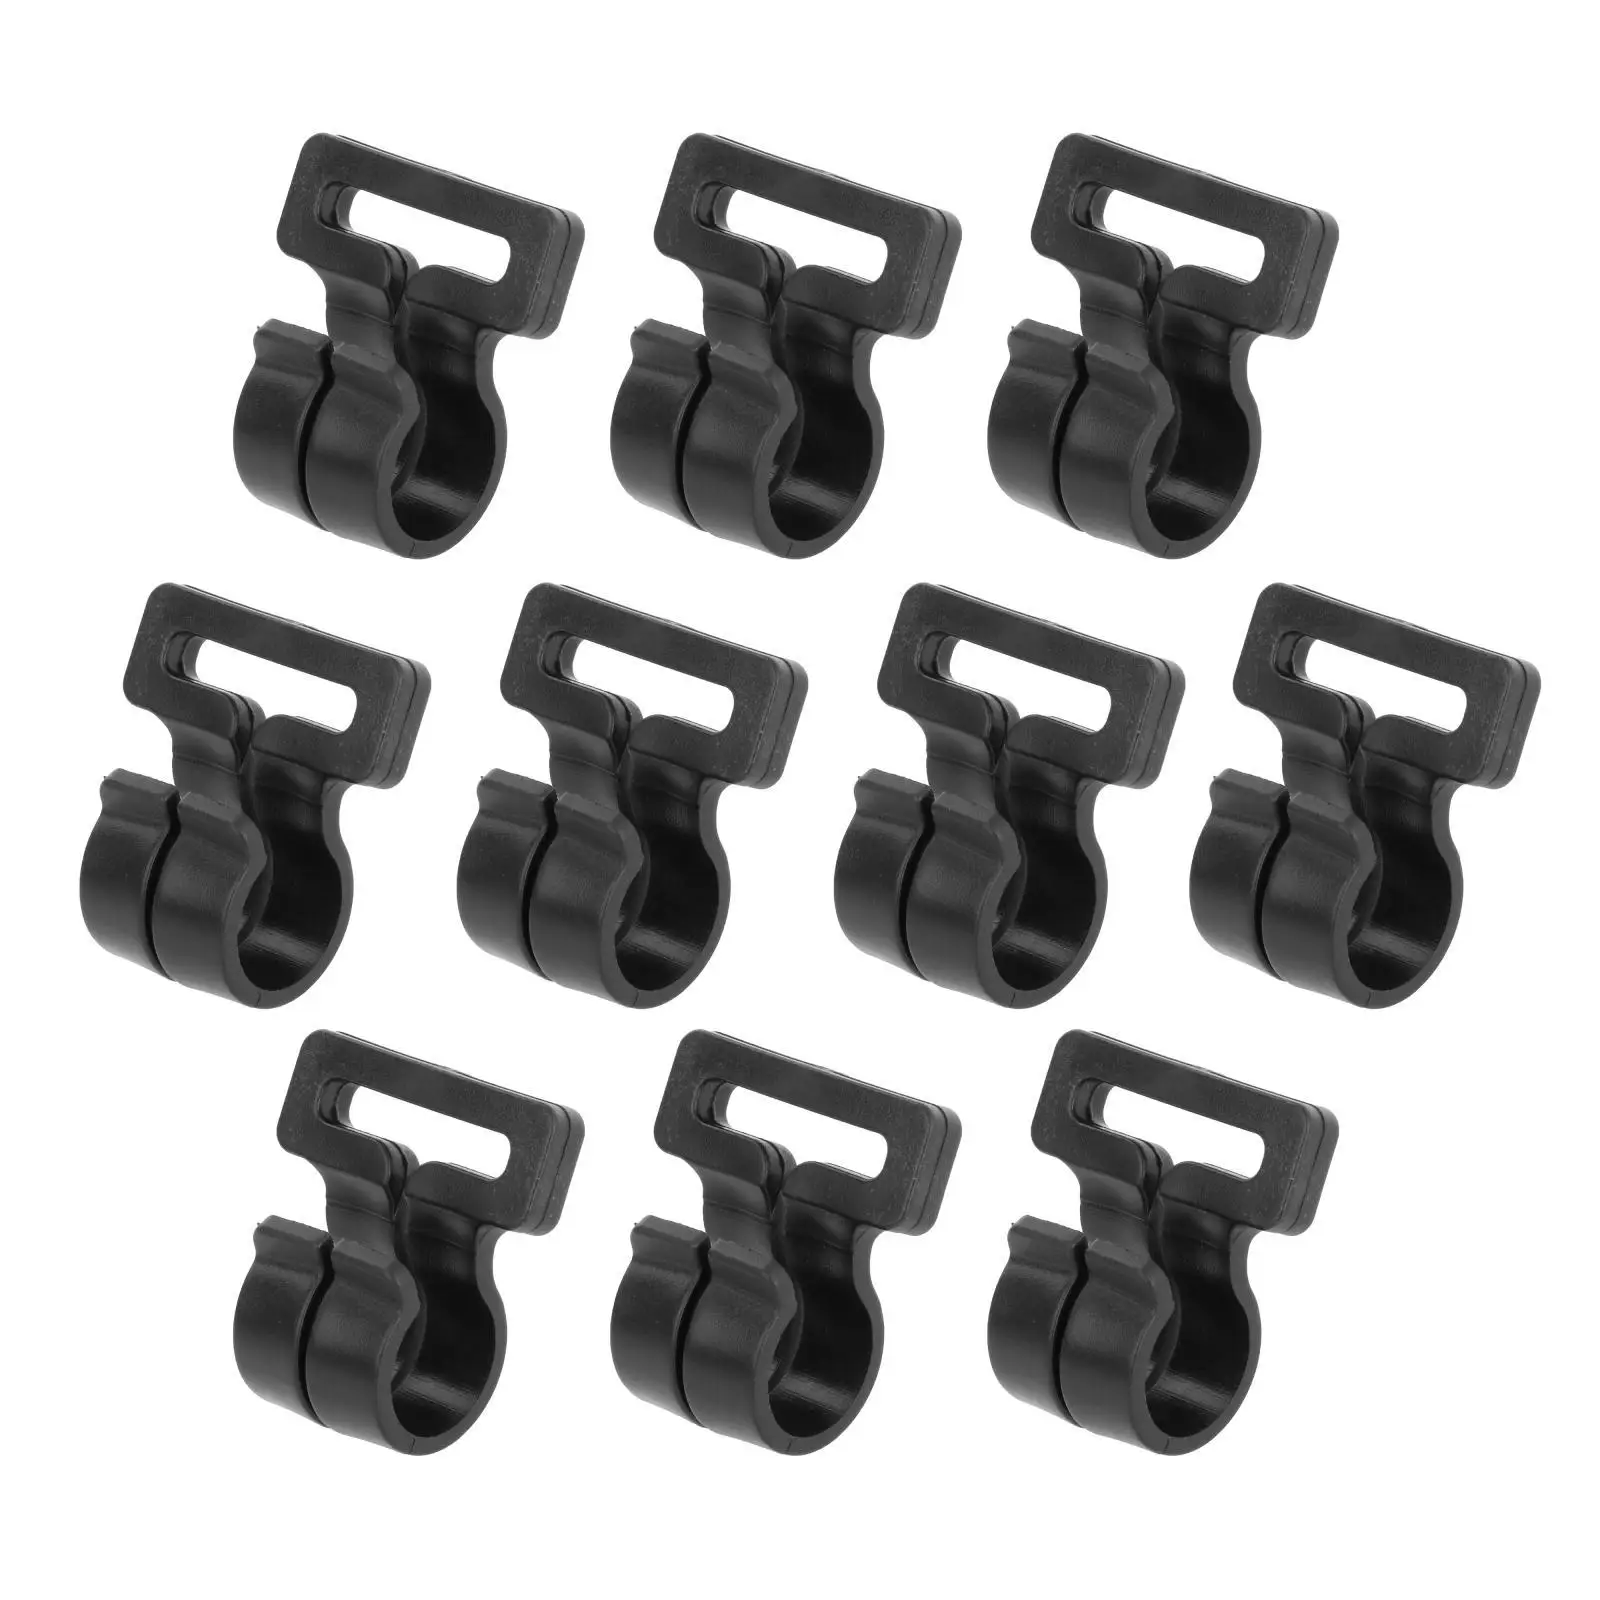 Set of 10 Camping Tent Pole Hook Awning Hooks Windproof Accessories High Quality Inner Tent Set for Indoor Outdoor Activity